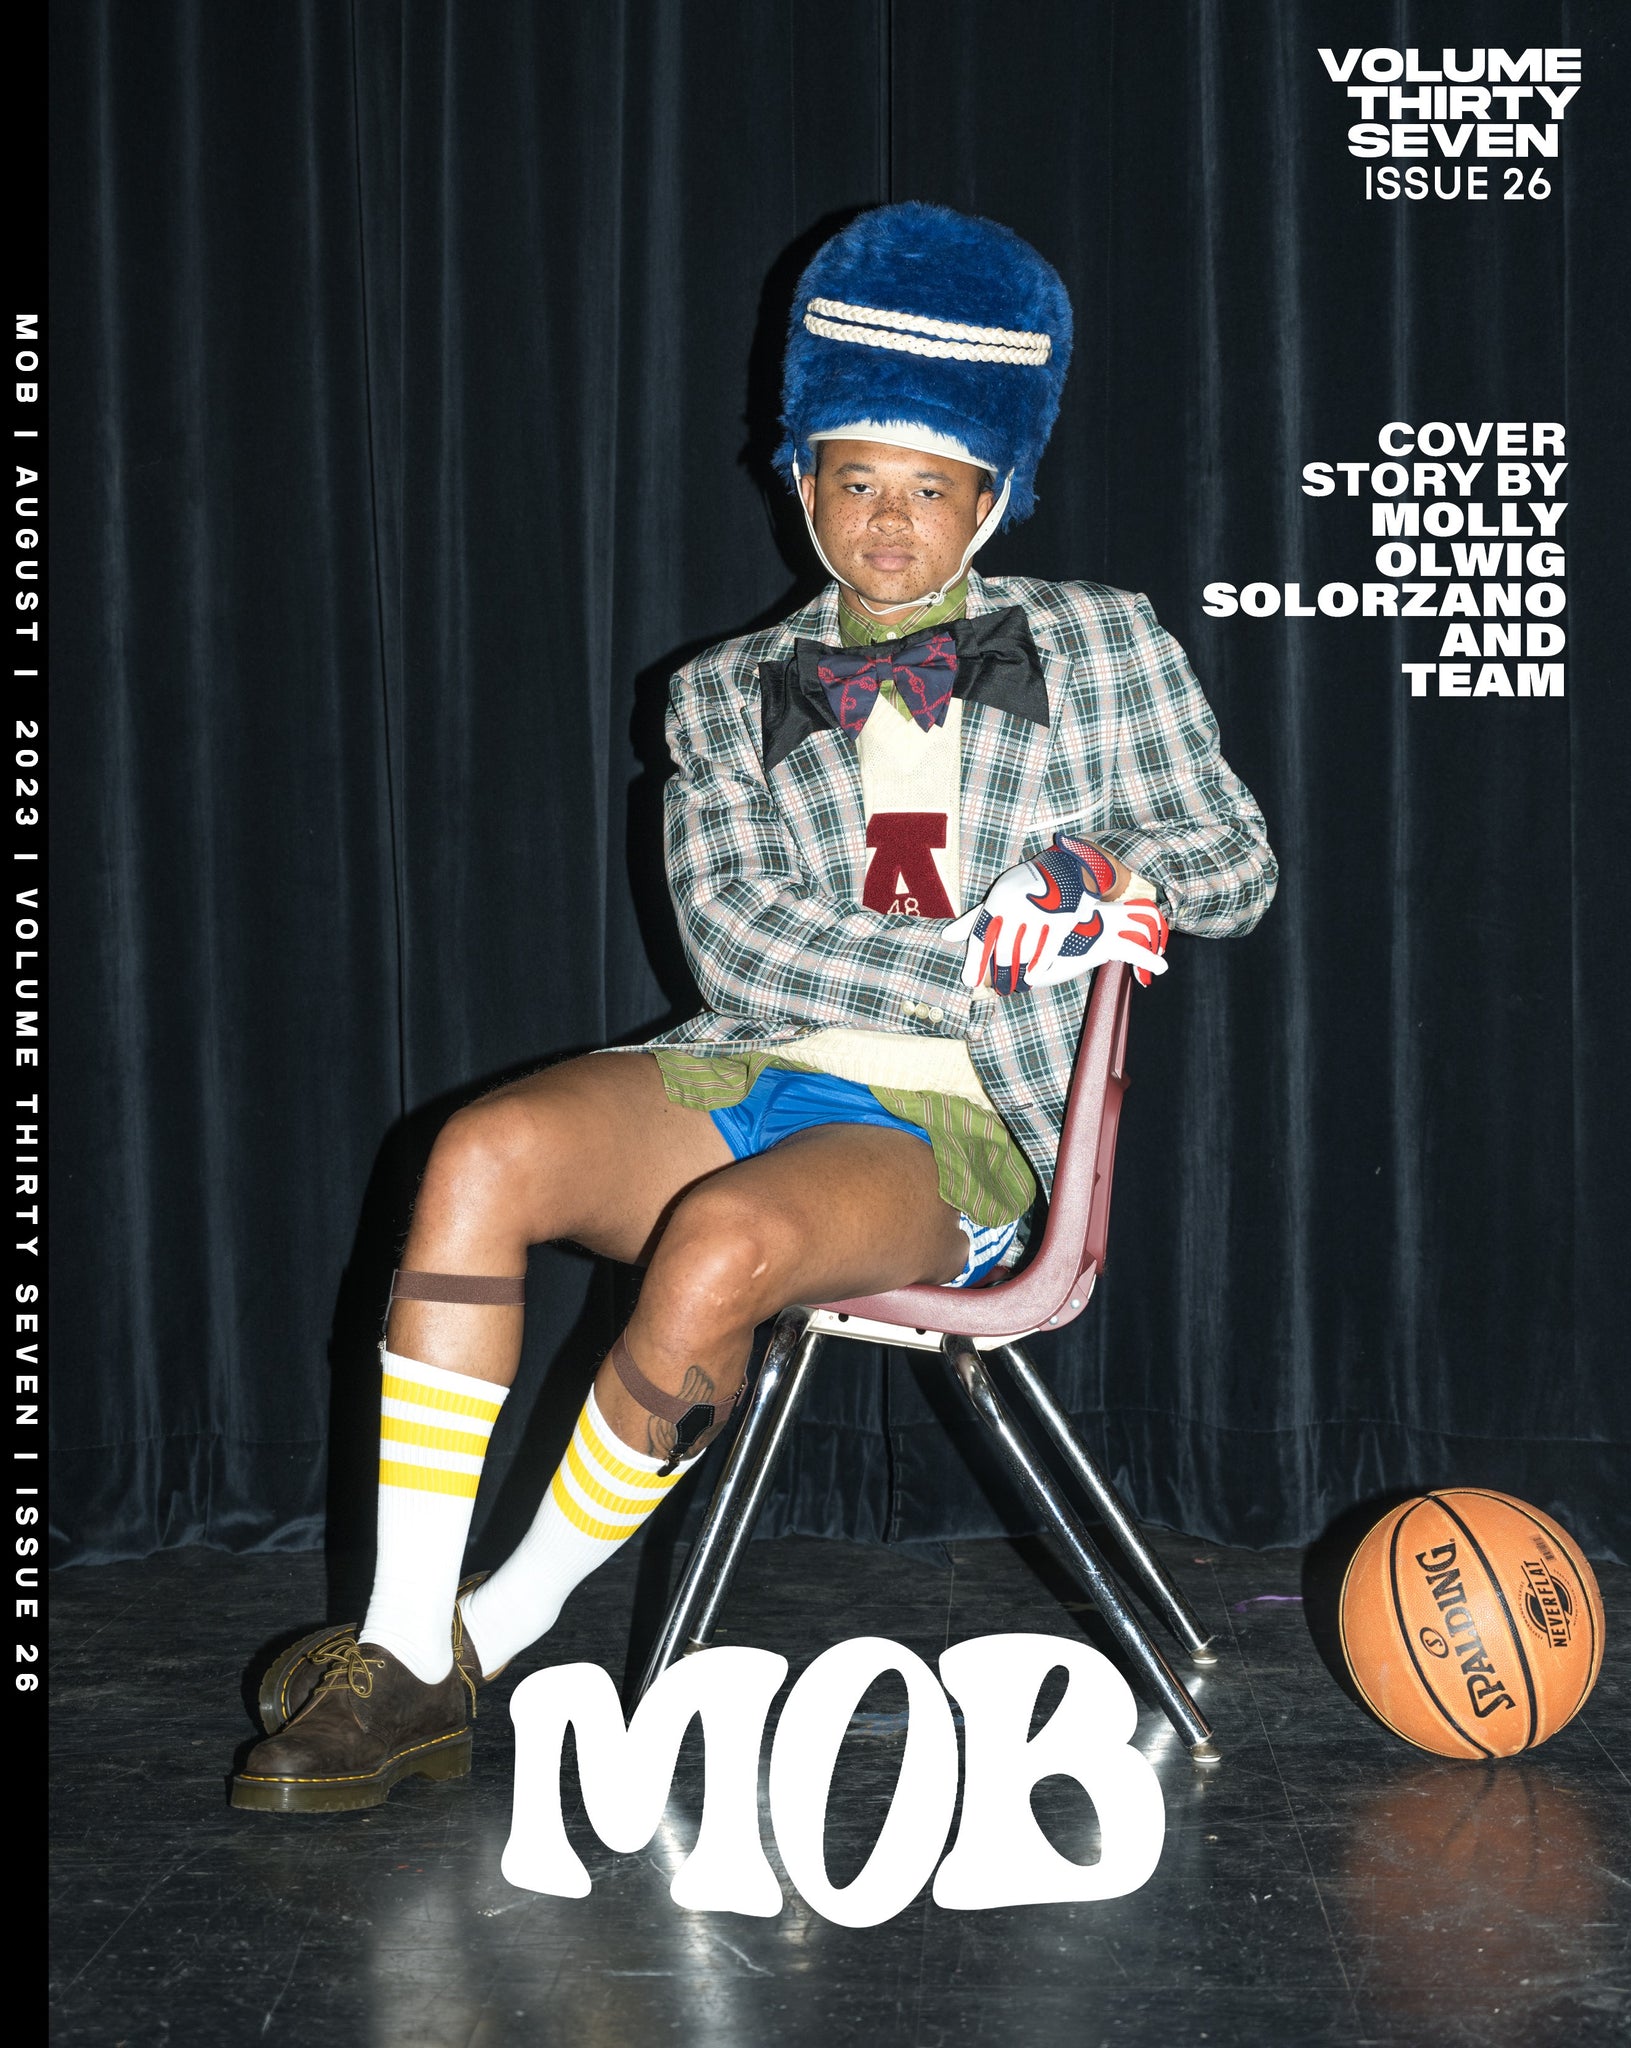 MOB JOURNAL | VOLUME THIRTY SEVEN | ISSUE #26